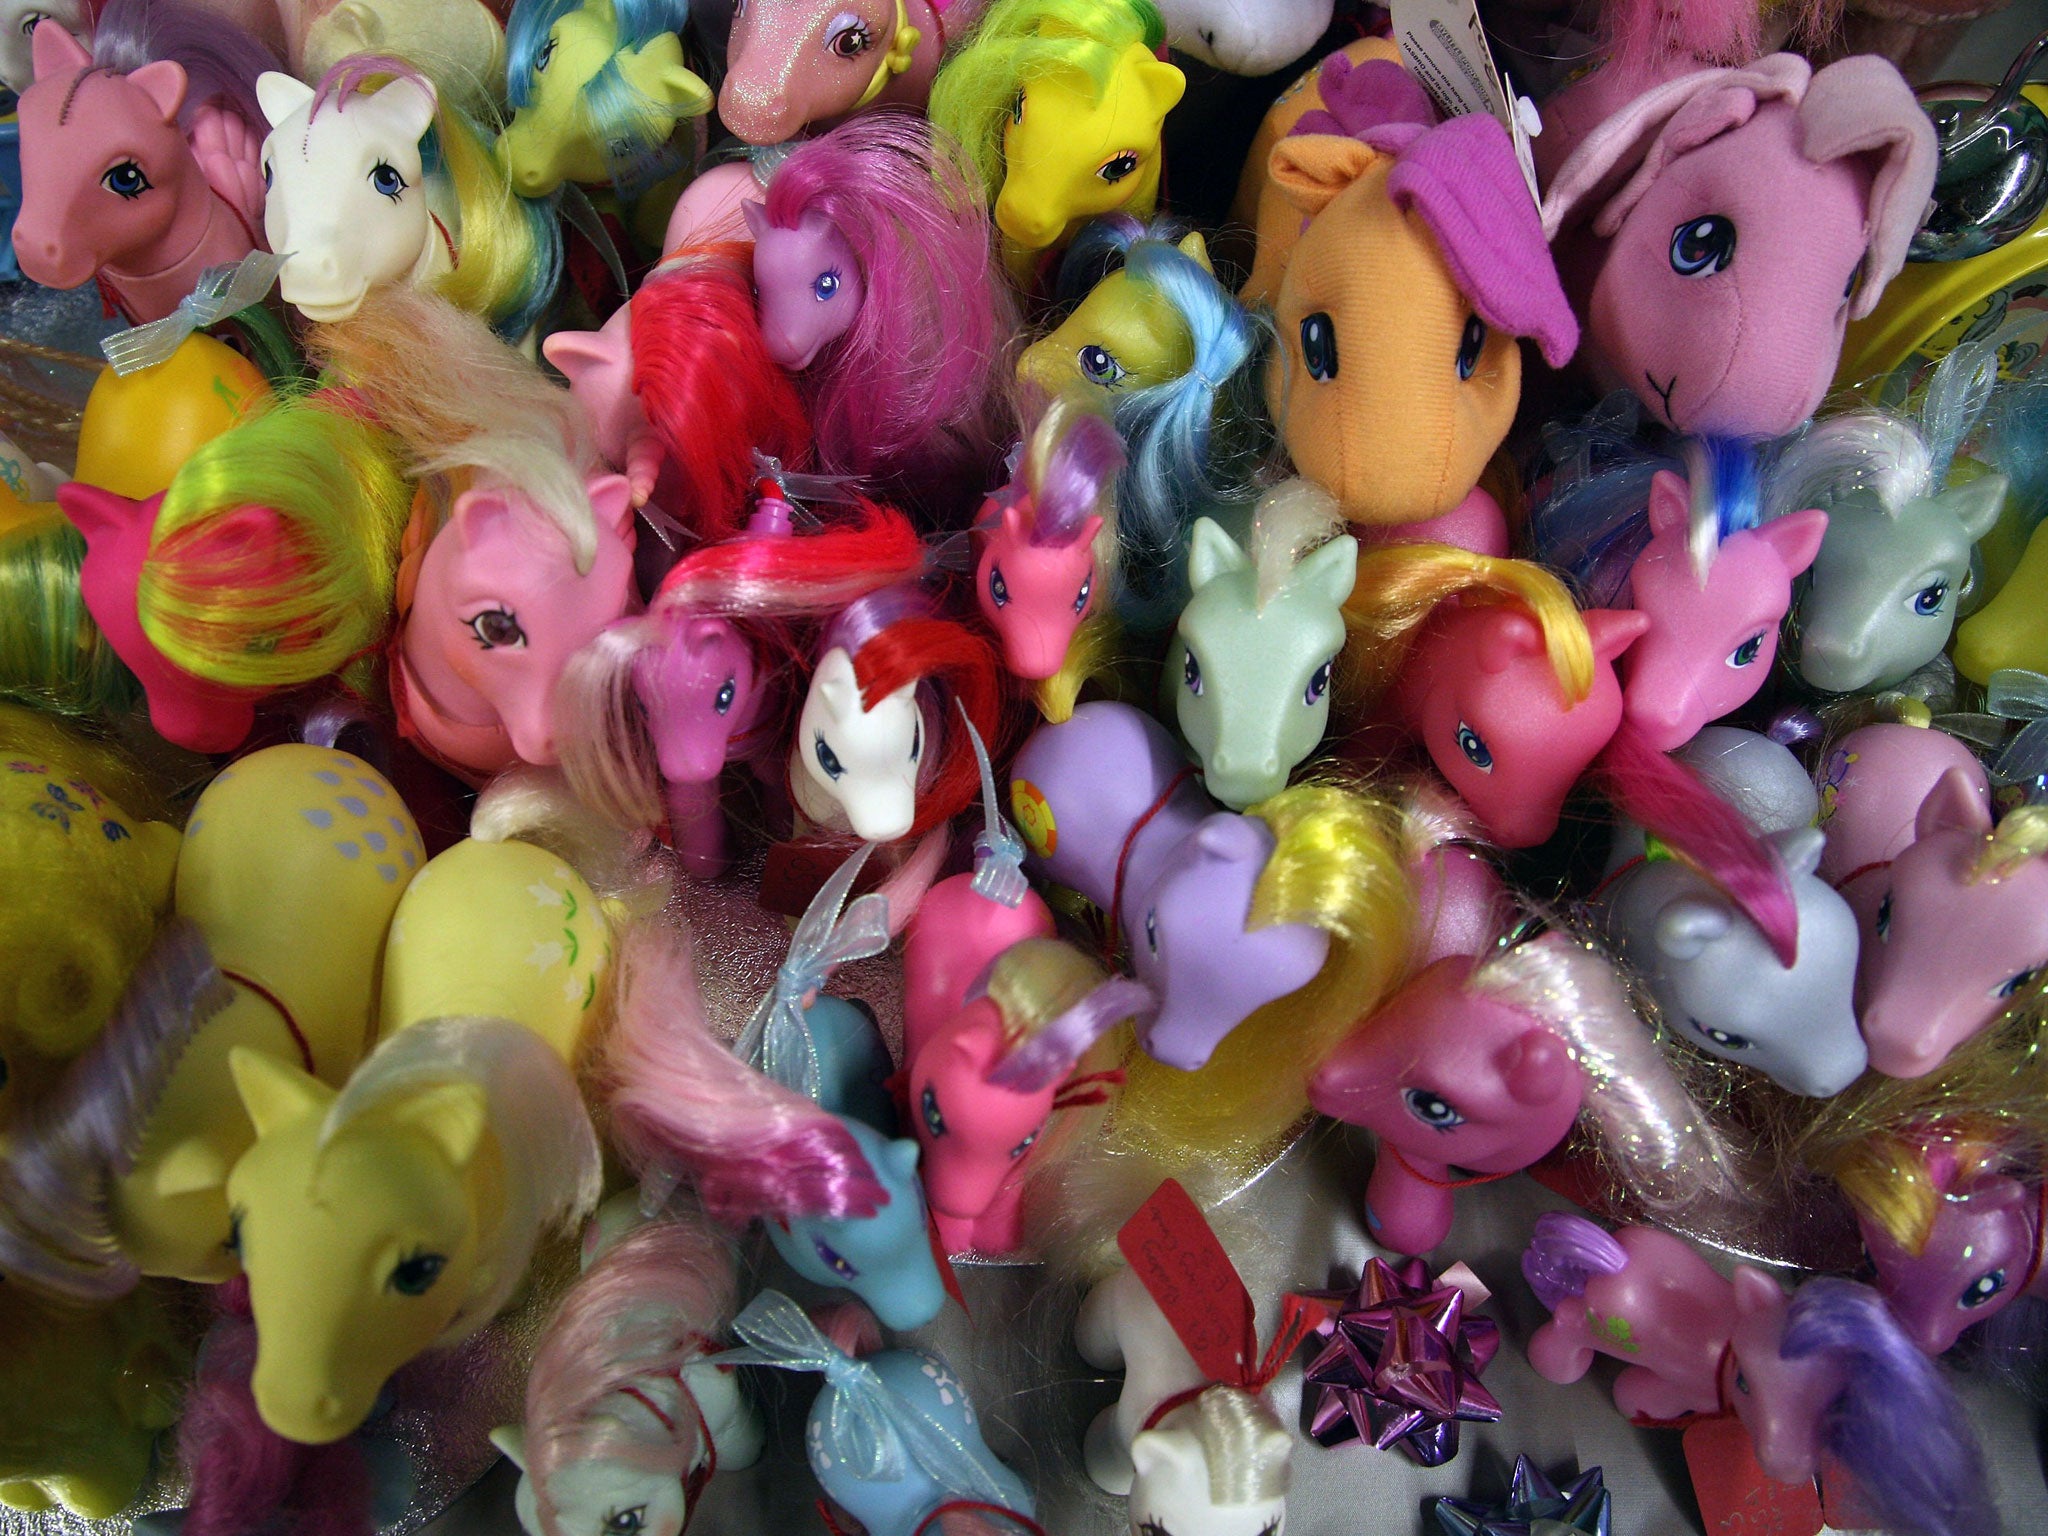 Researchers detected heavy metals in more than 100 vinyl and non-vinyl toys, including My Little Pony dolls